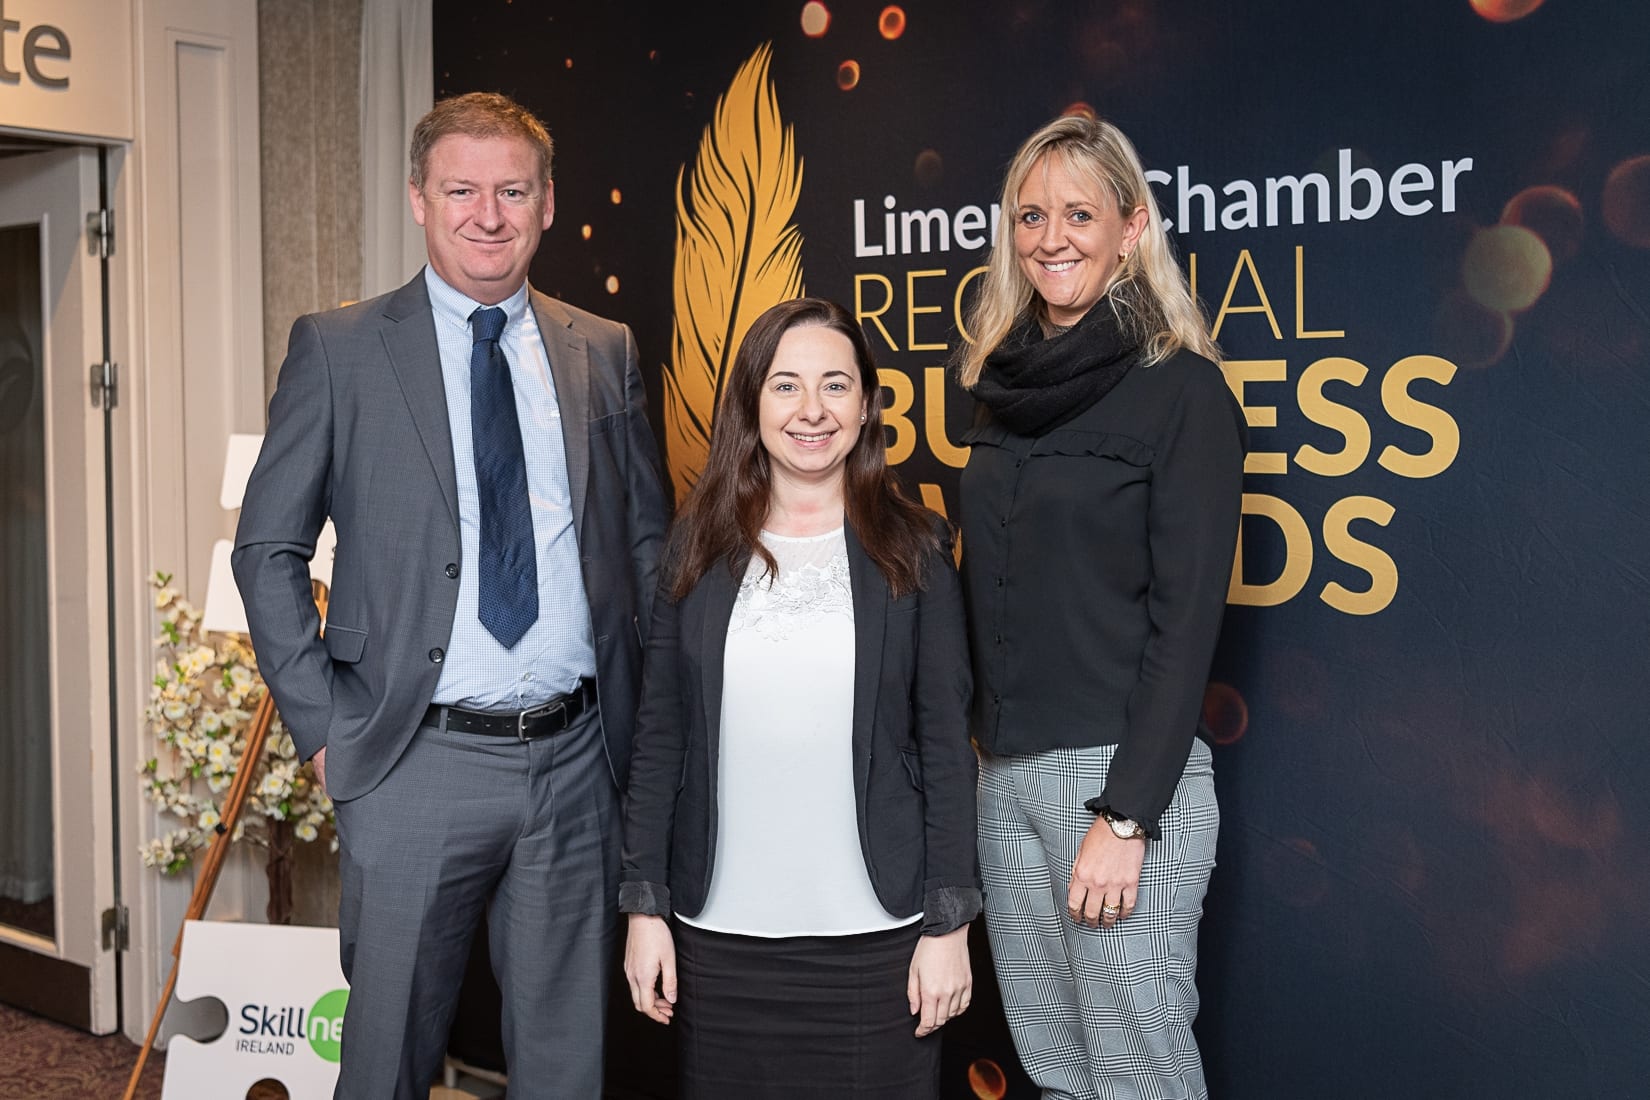 No repro fee-Limerick Chamber President Dinner Shortlist announcement which was held in The Limerick Strand Hotel on Wednesday 16th October  - From Left to Right: Damien Garihy - AIB, Magdalena Koziel - Deloitte, Olivia Hayes- Ingenium Training Consulting. 
Photo credit Shauna Kennedy